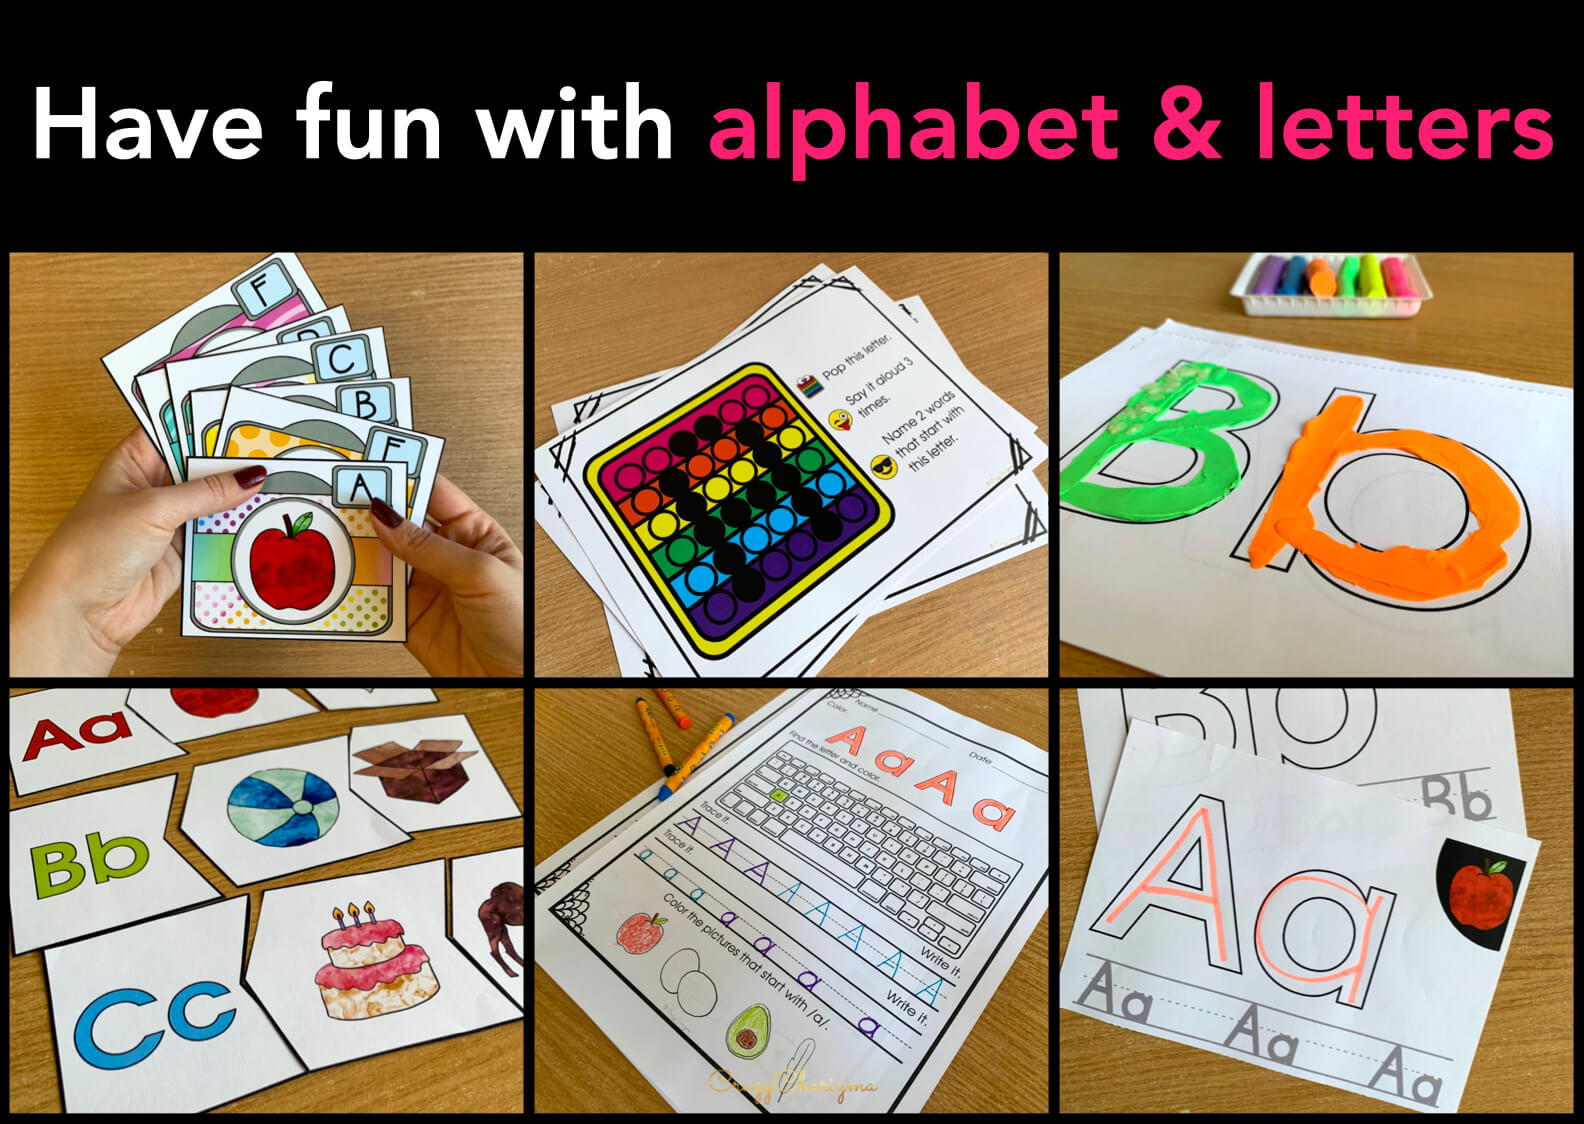 Alphabet hands-on activities, worksheets and centers